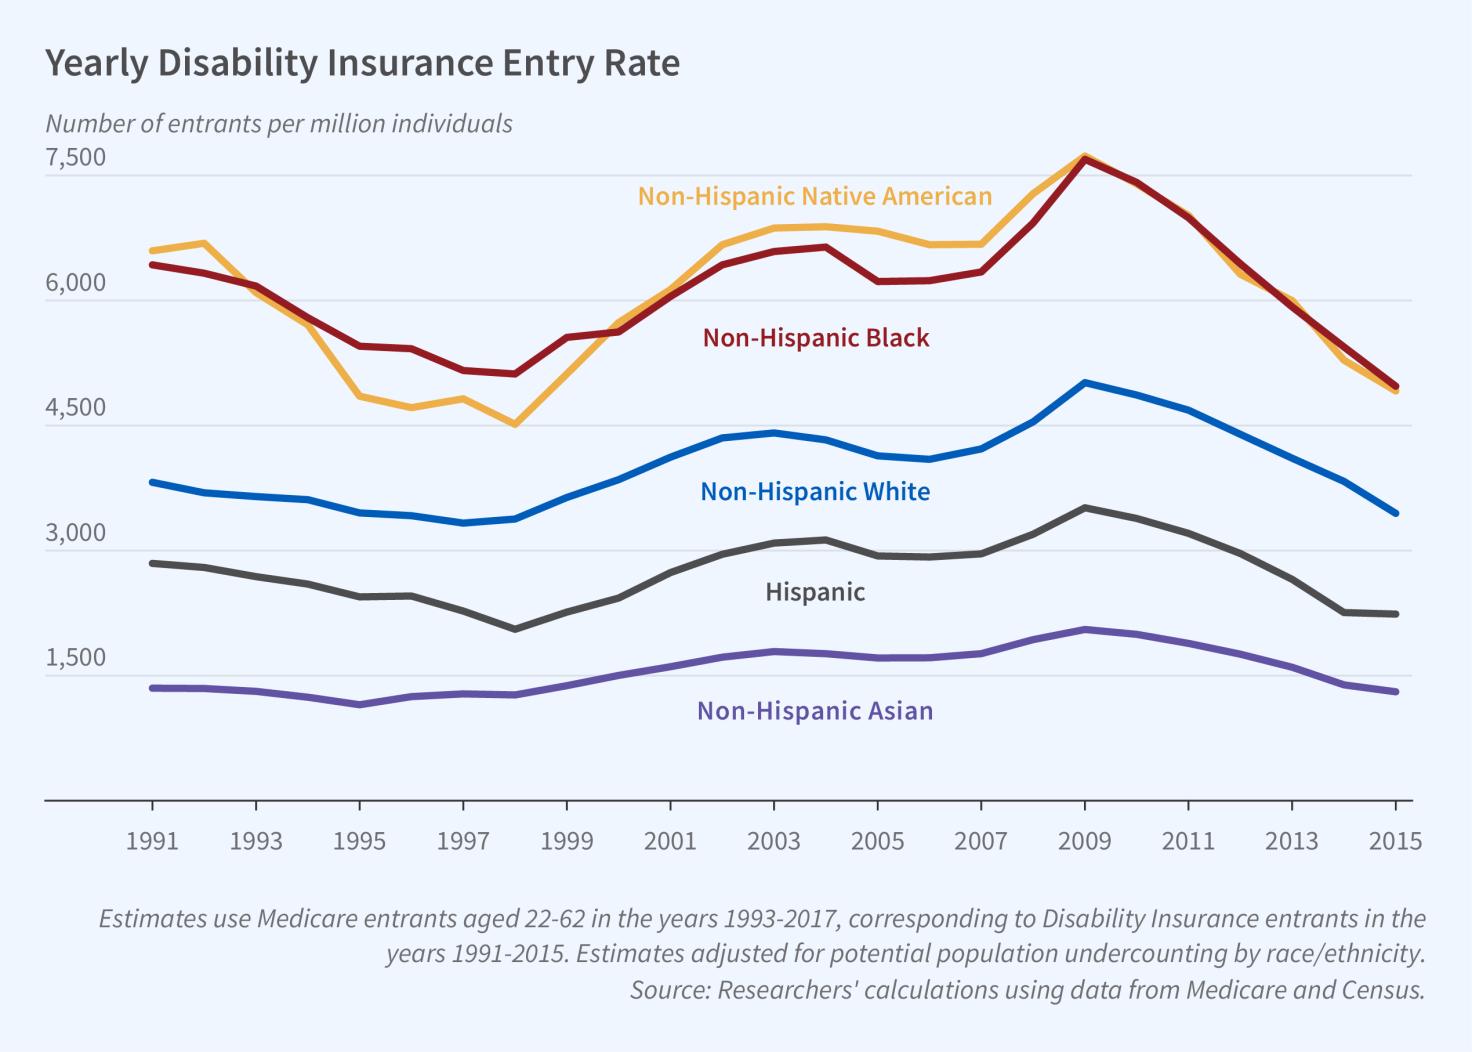 Racial and Ethnic Disparities in SSDI Entry and Health figure